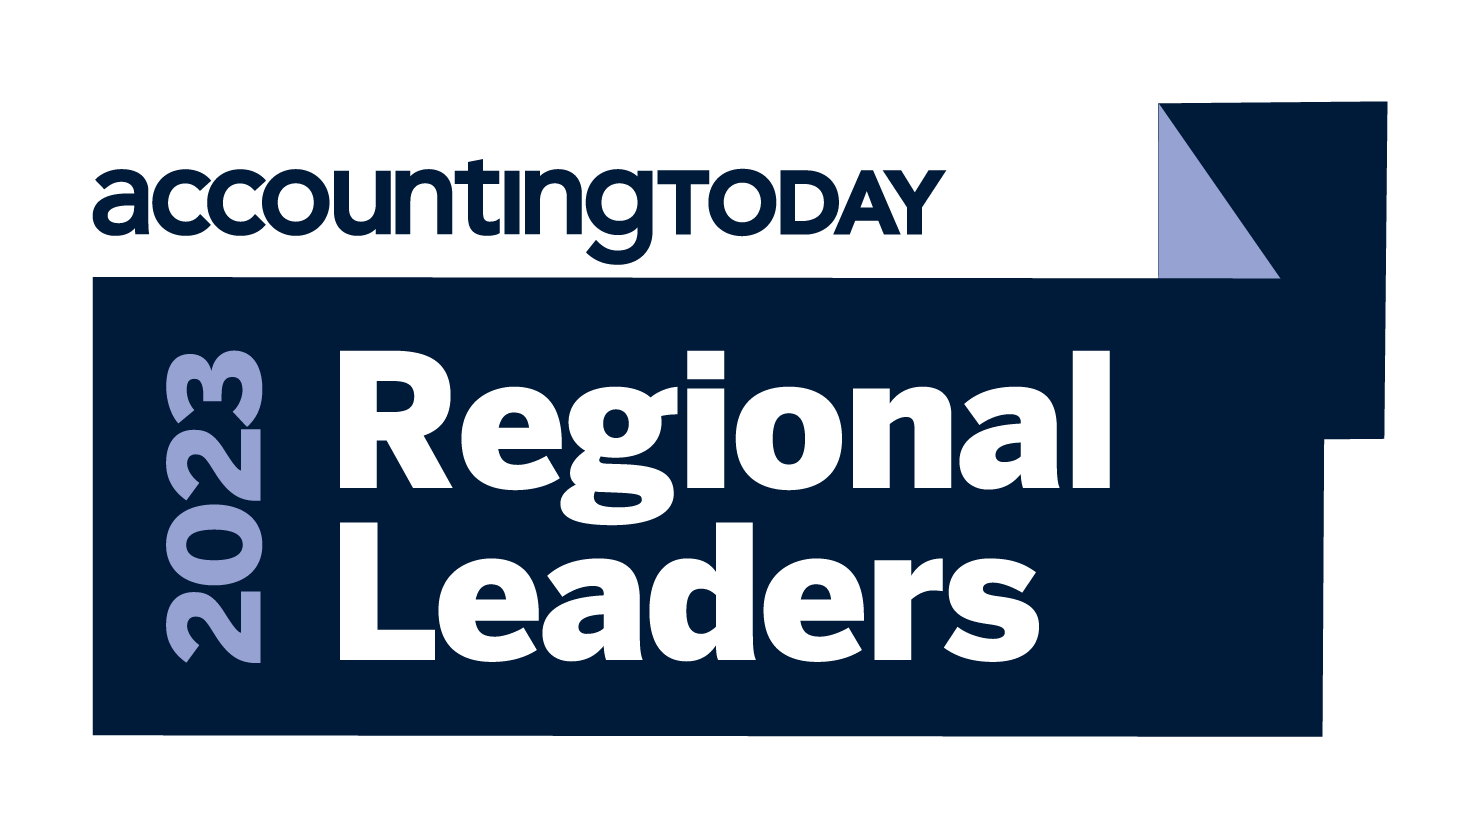 accounting today Regional Leaders 